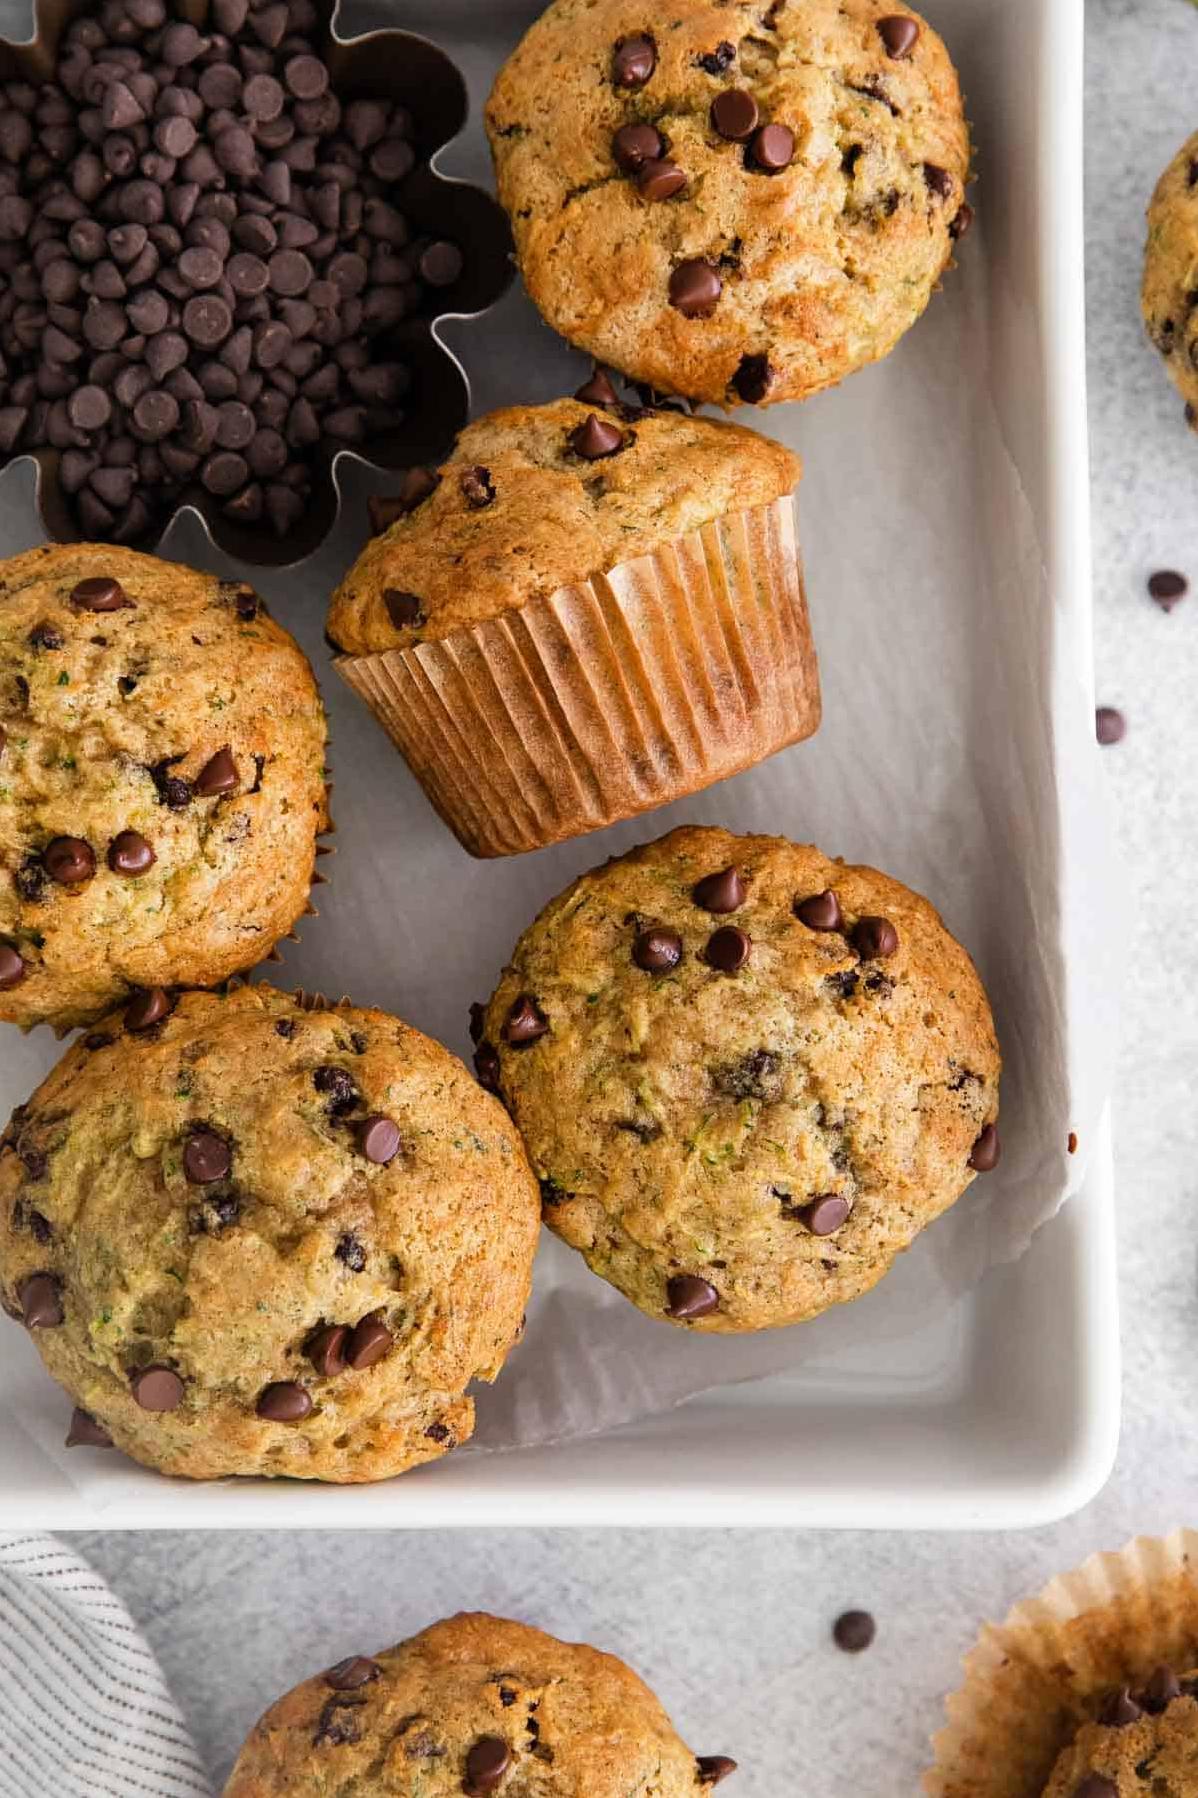  These muffins are so delicious, you won't believe they're gluten-free and dairy-free.